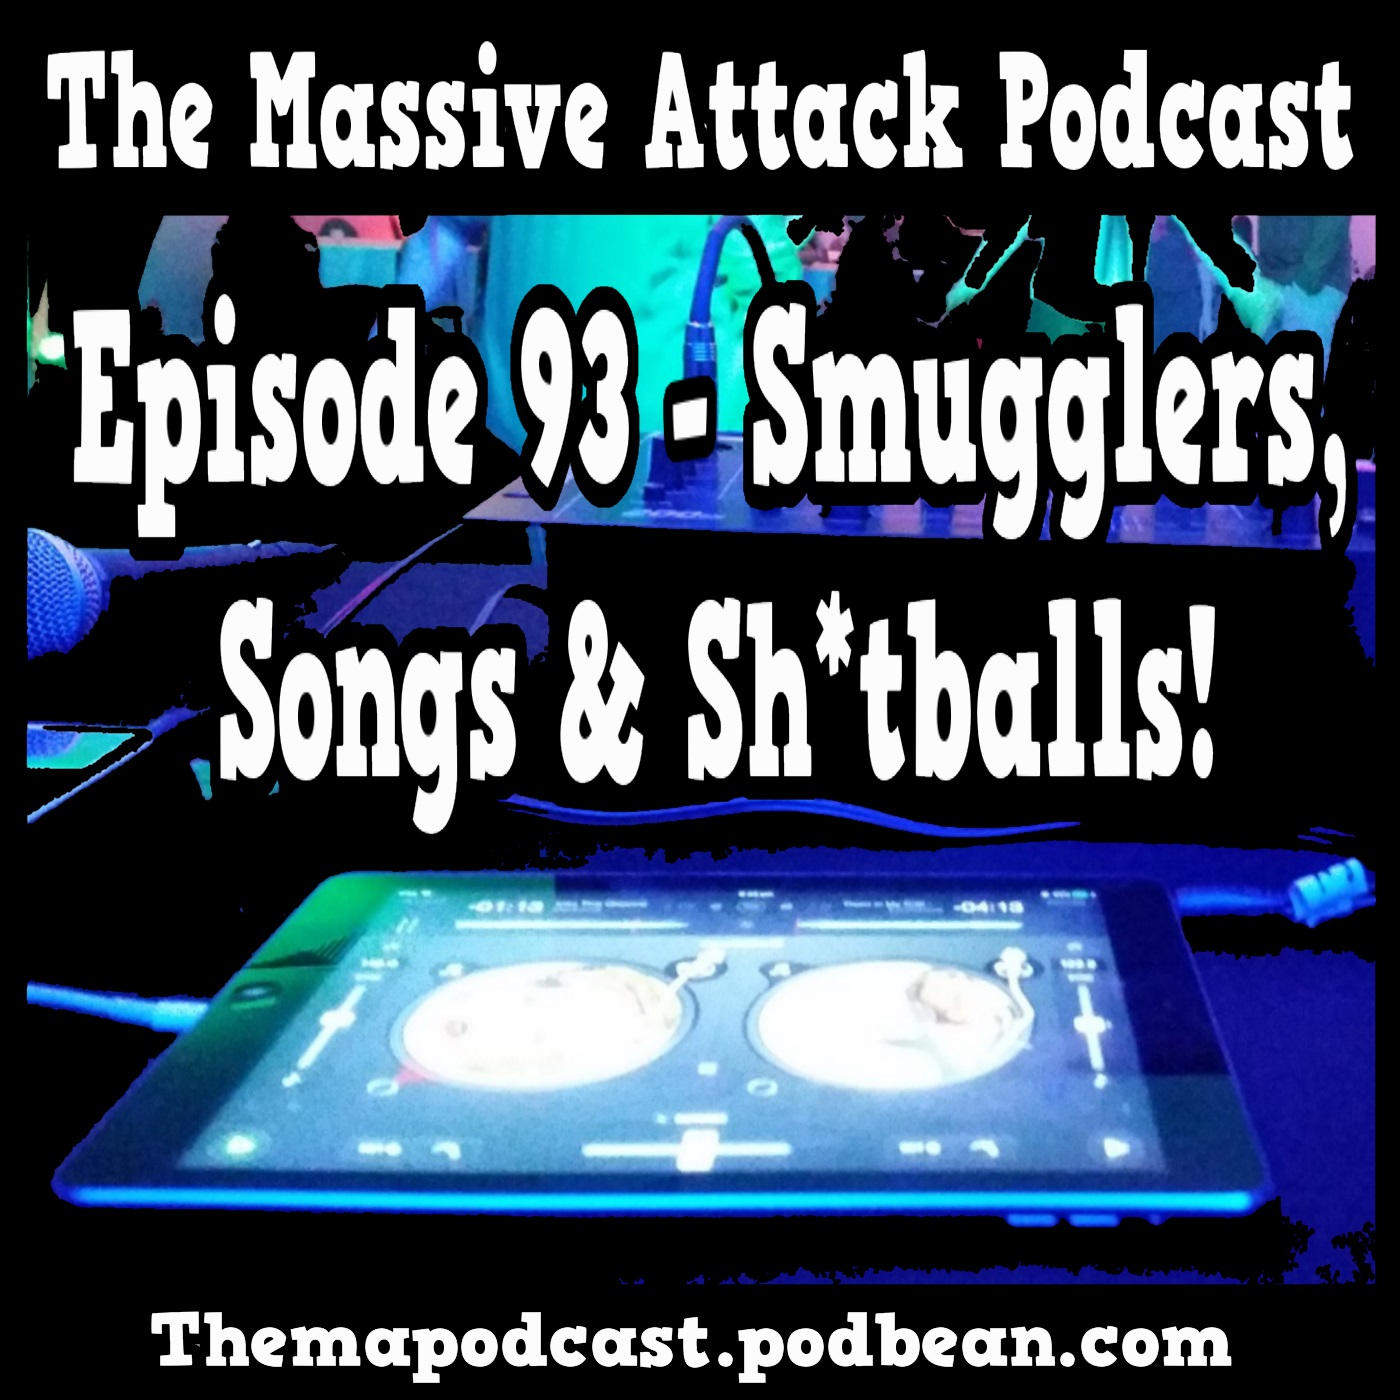 Episode 93 - Smugglers, Songs and Sh*tballs!